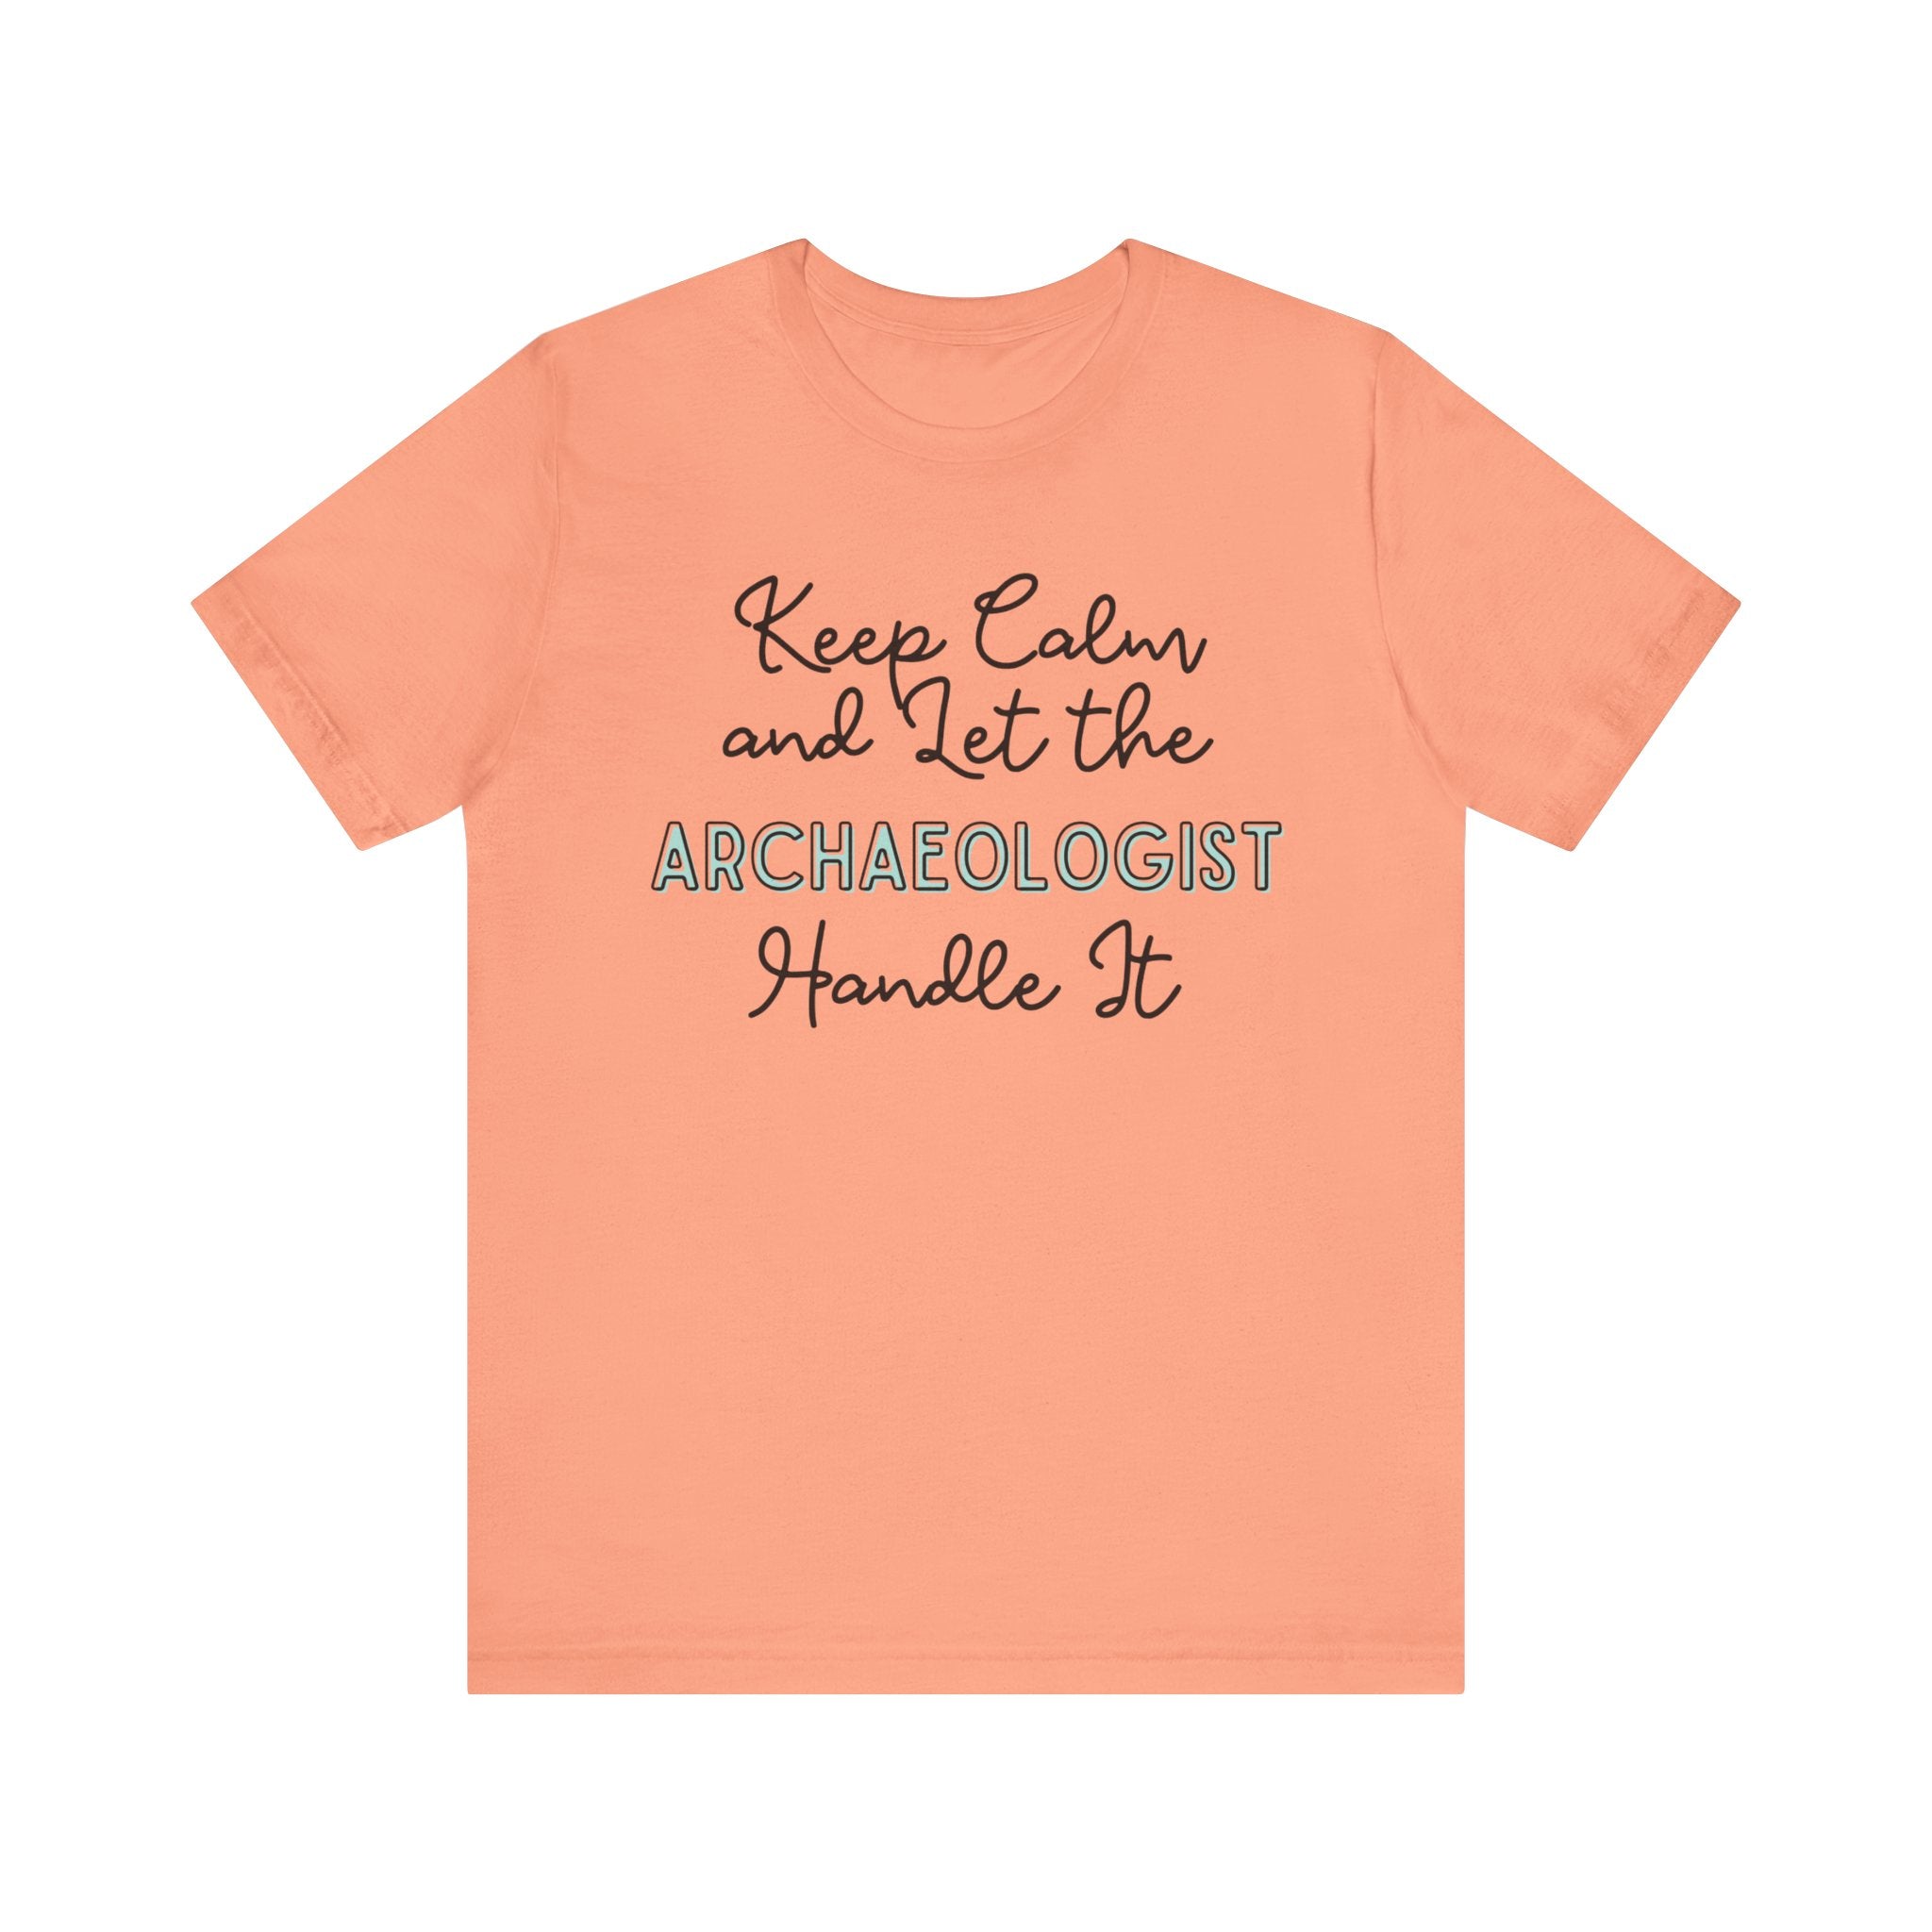 Keep Calm and let the Archaeologist handle It - Jersey Short Sleeve Tee